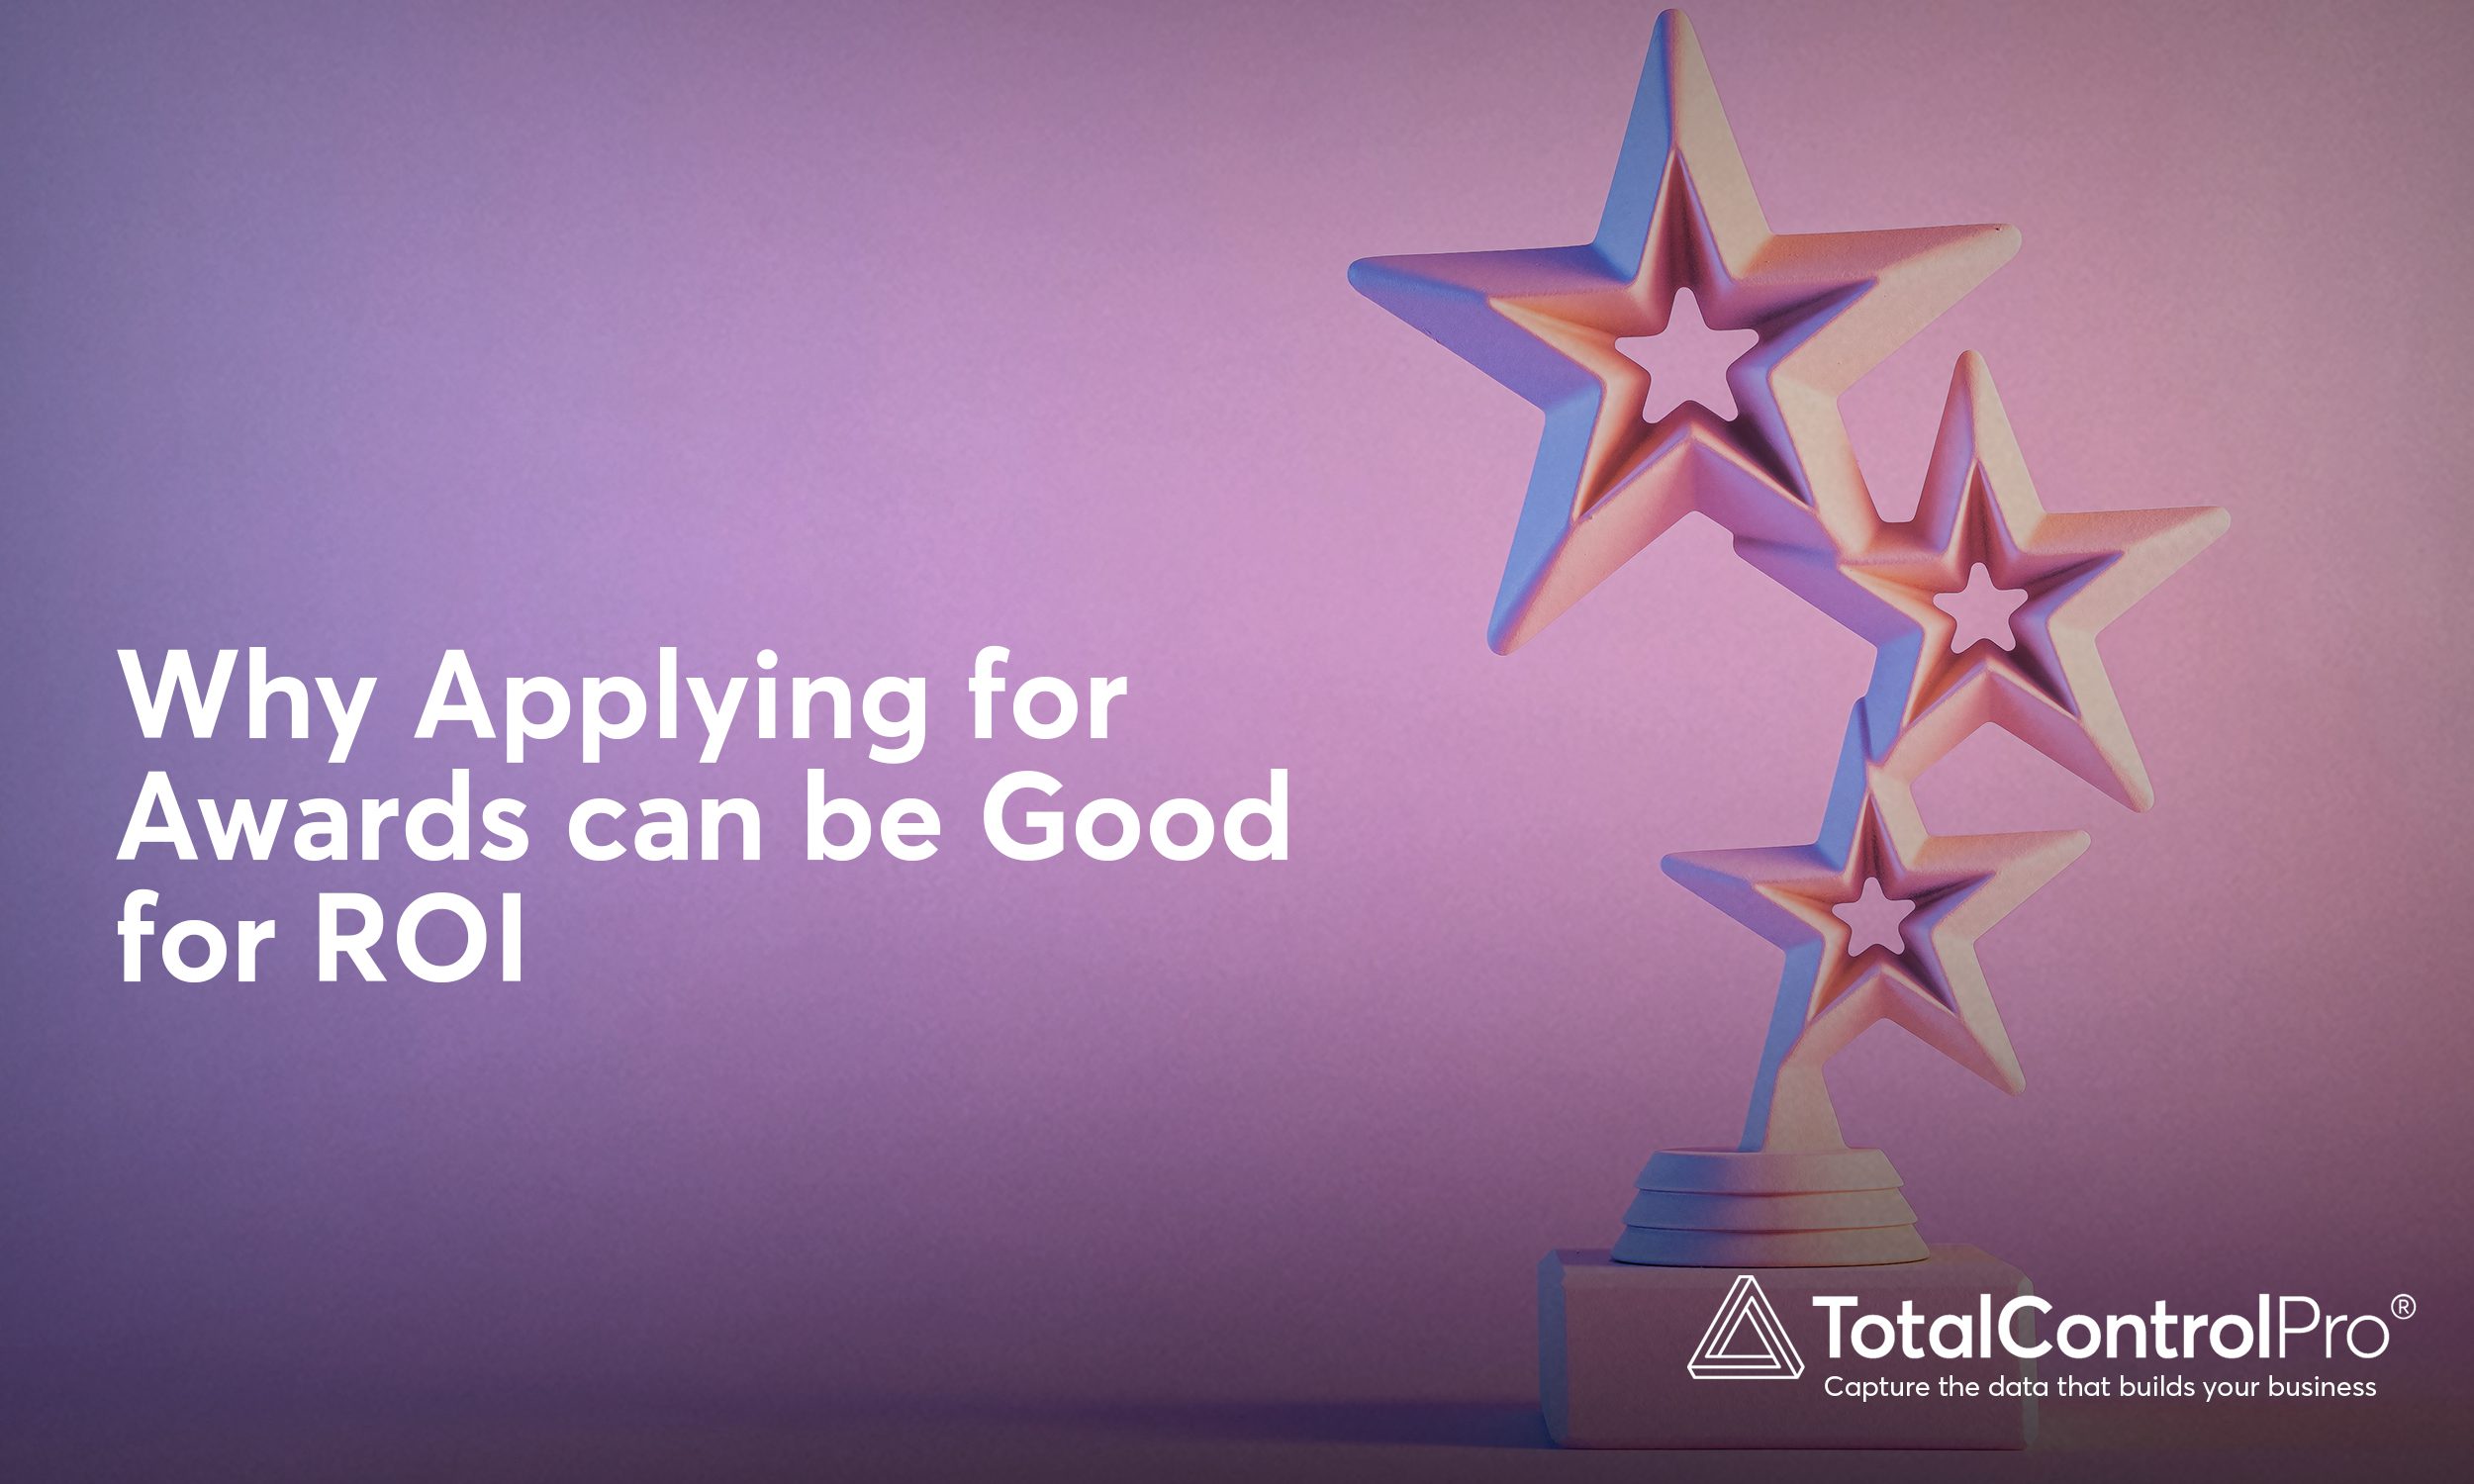 Awards can be Good for ROI